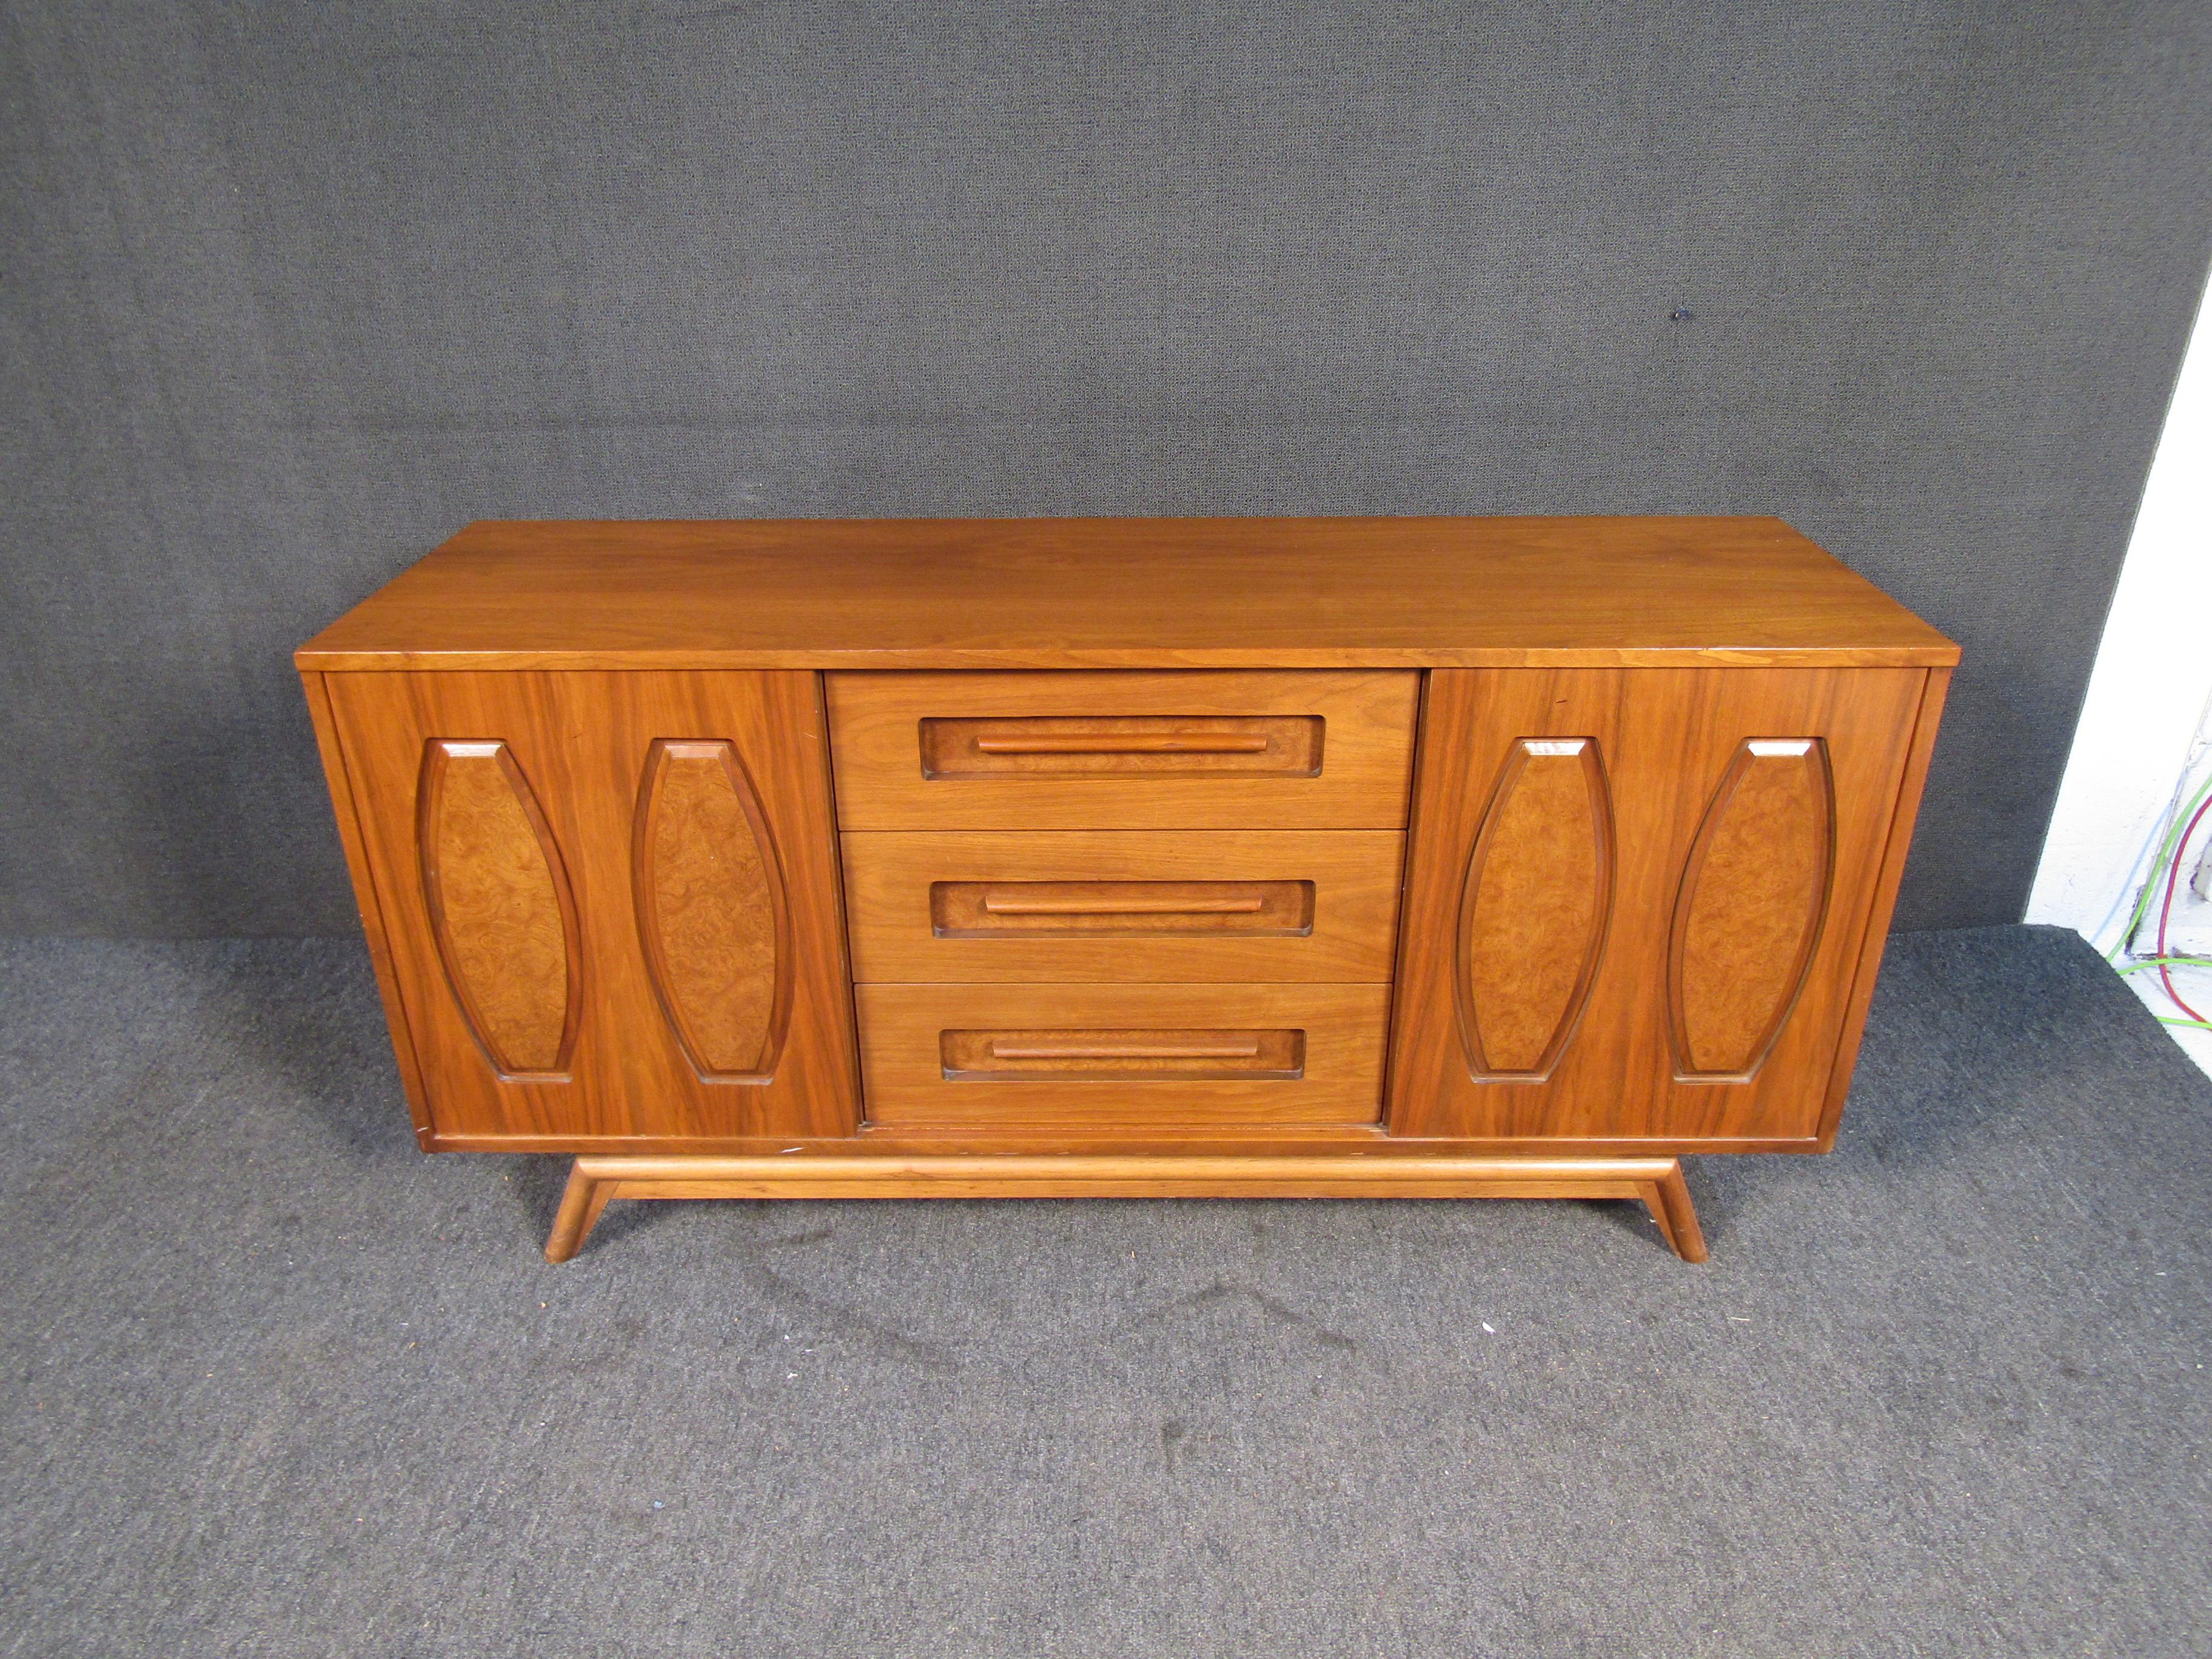 This large mid-century credenza is full of timeless style with its sculpted legs, decorated sliding doors, and beautiful warm wood grain. Please confirm item location with seller (NY/NJ).